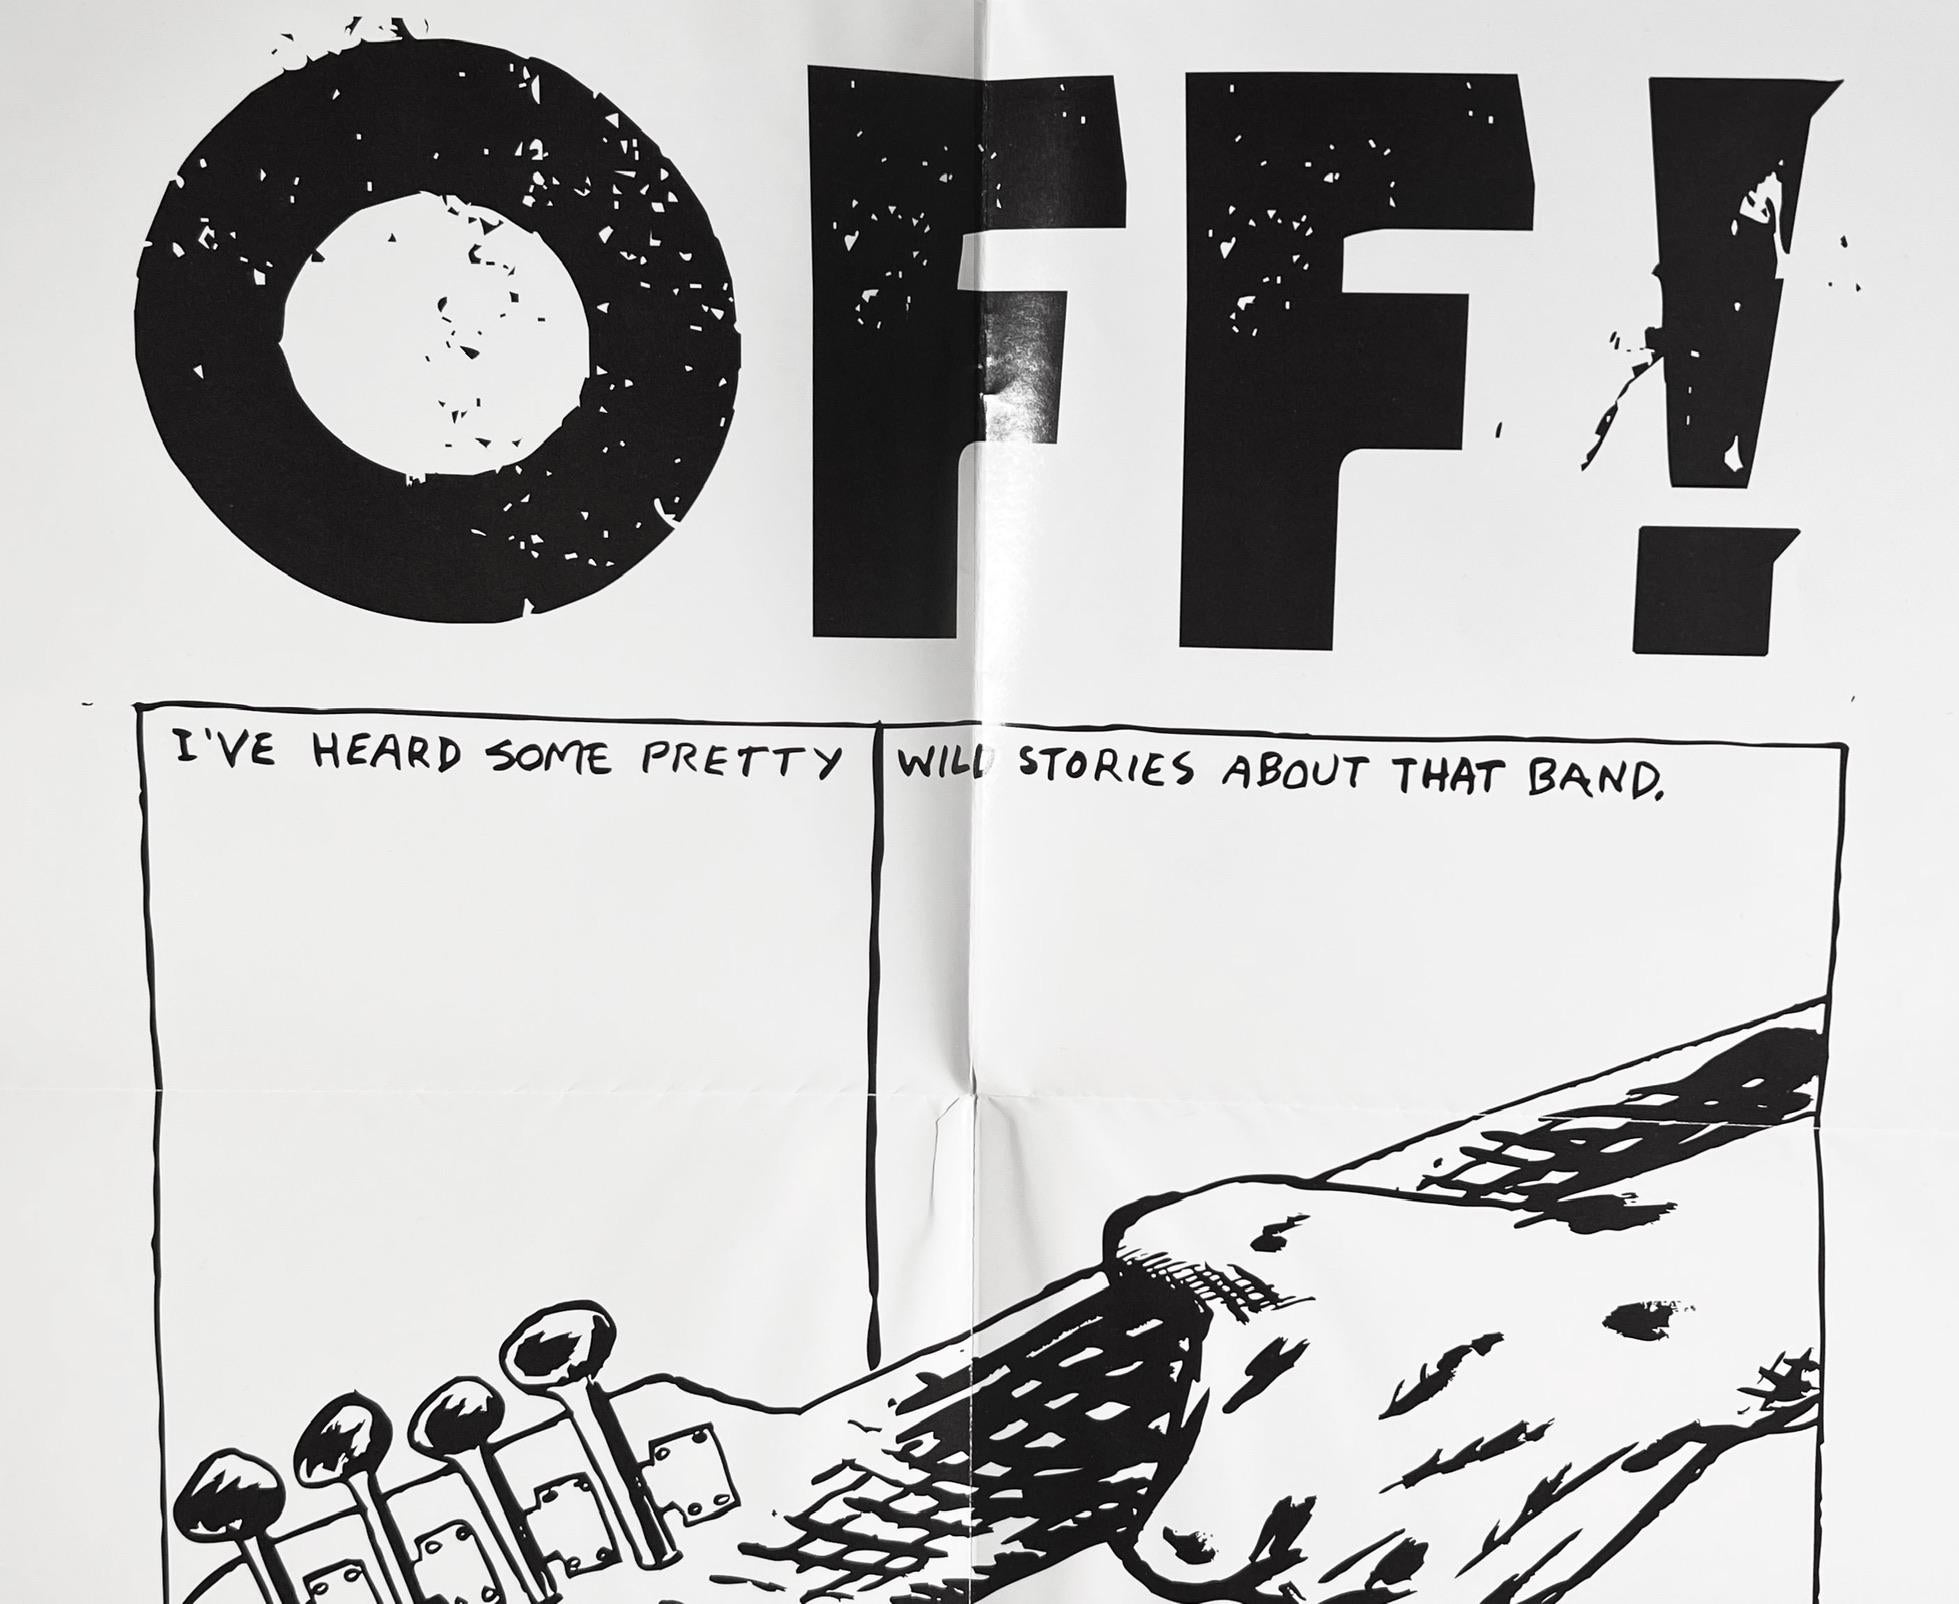 Raymond Pettibon Off! 
Off! band poster illustrated by Raymond Pettibon for the famed 2009 punk band co-founded by Pettibon’s friend, Black Flag’s, Keith Morris.

Medium & dimensions: offset lithograph; 11x17 inches. Circa 2019.

Very good